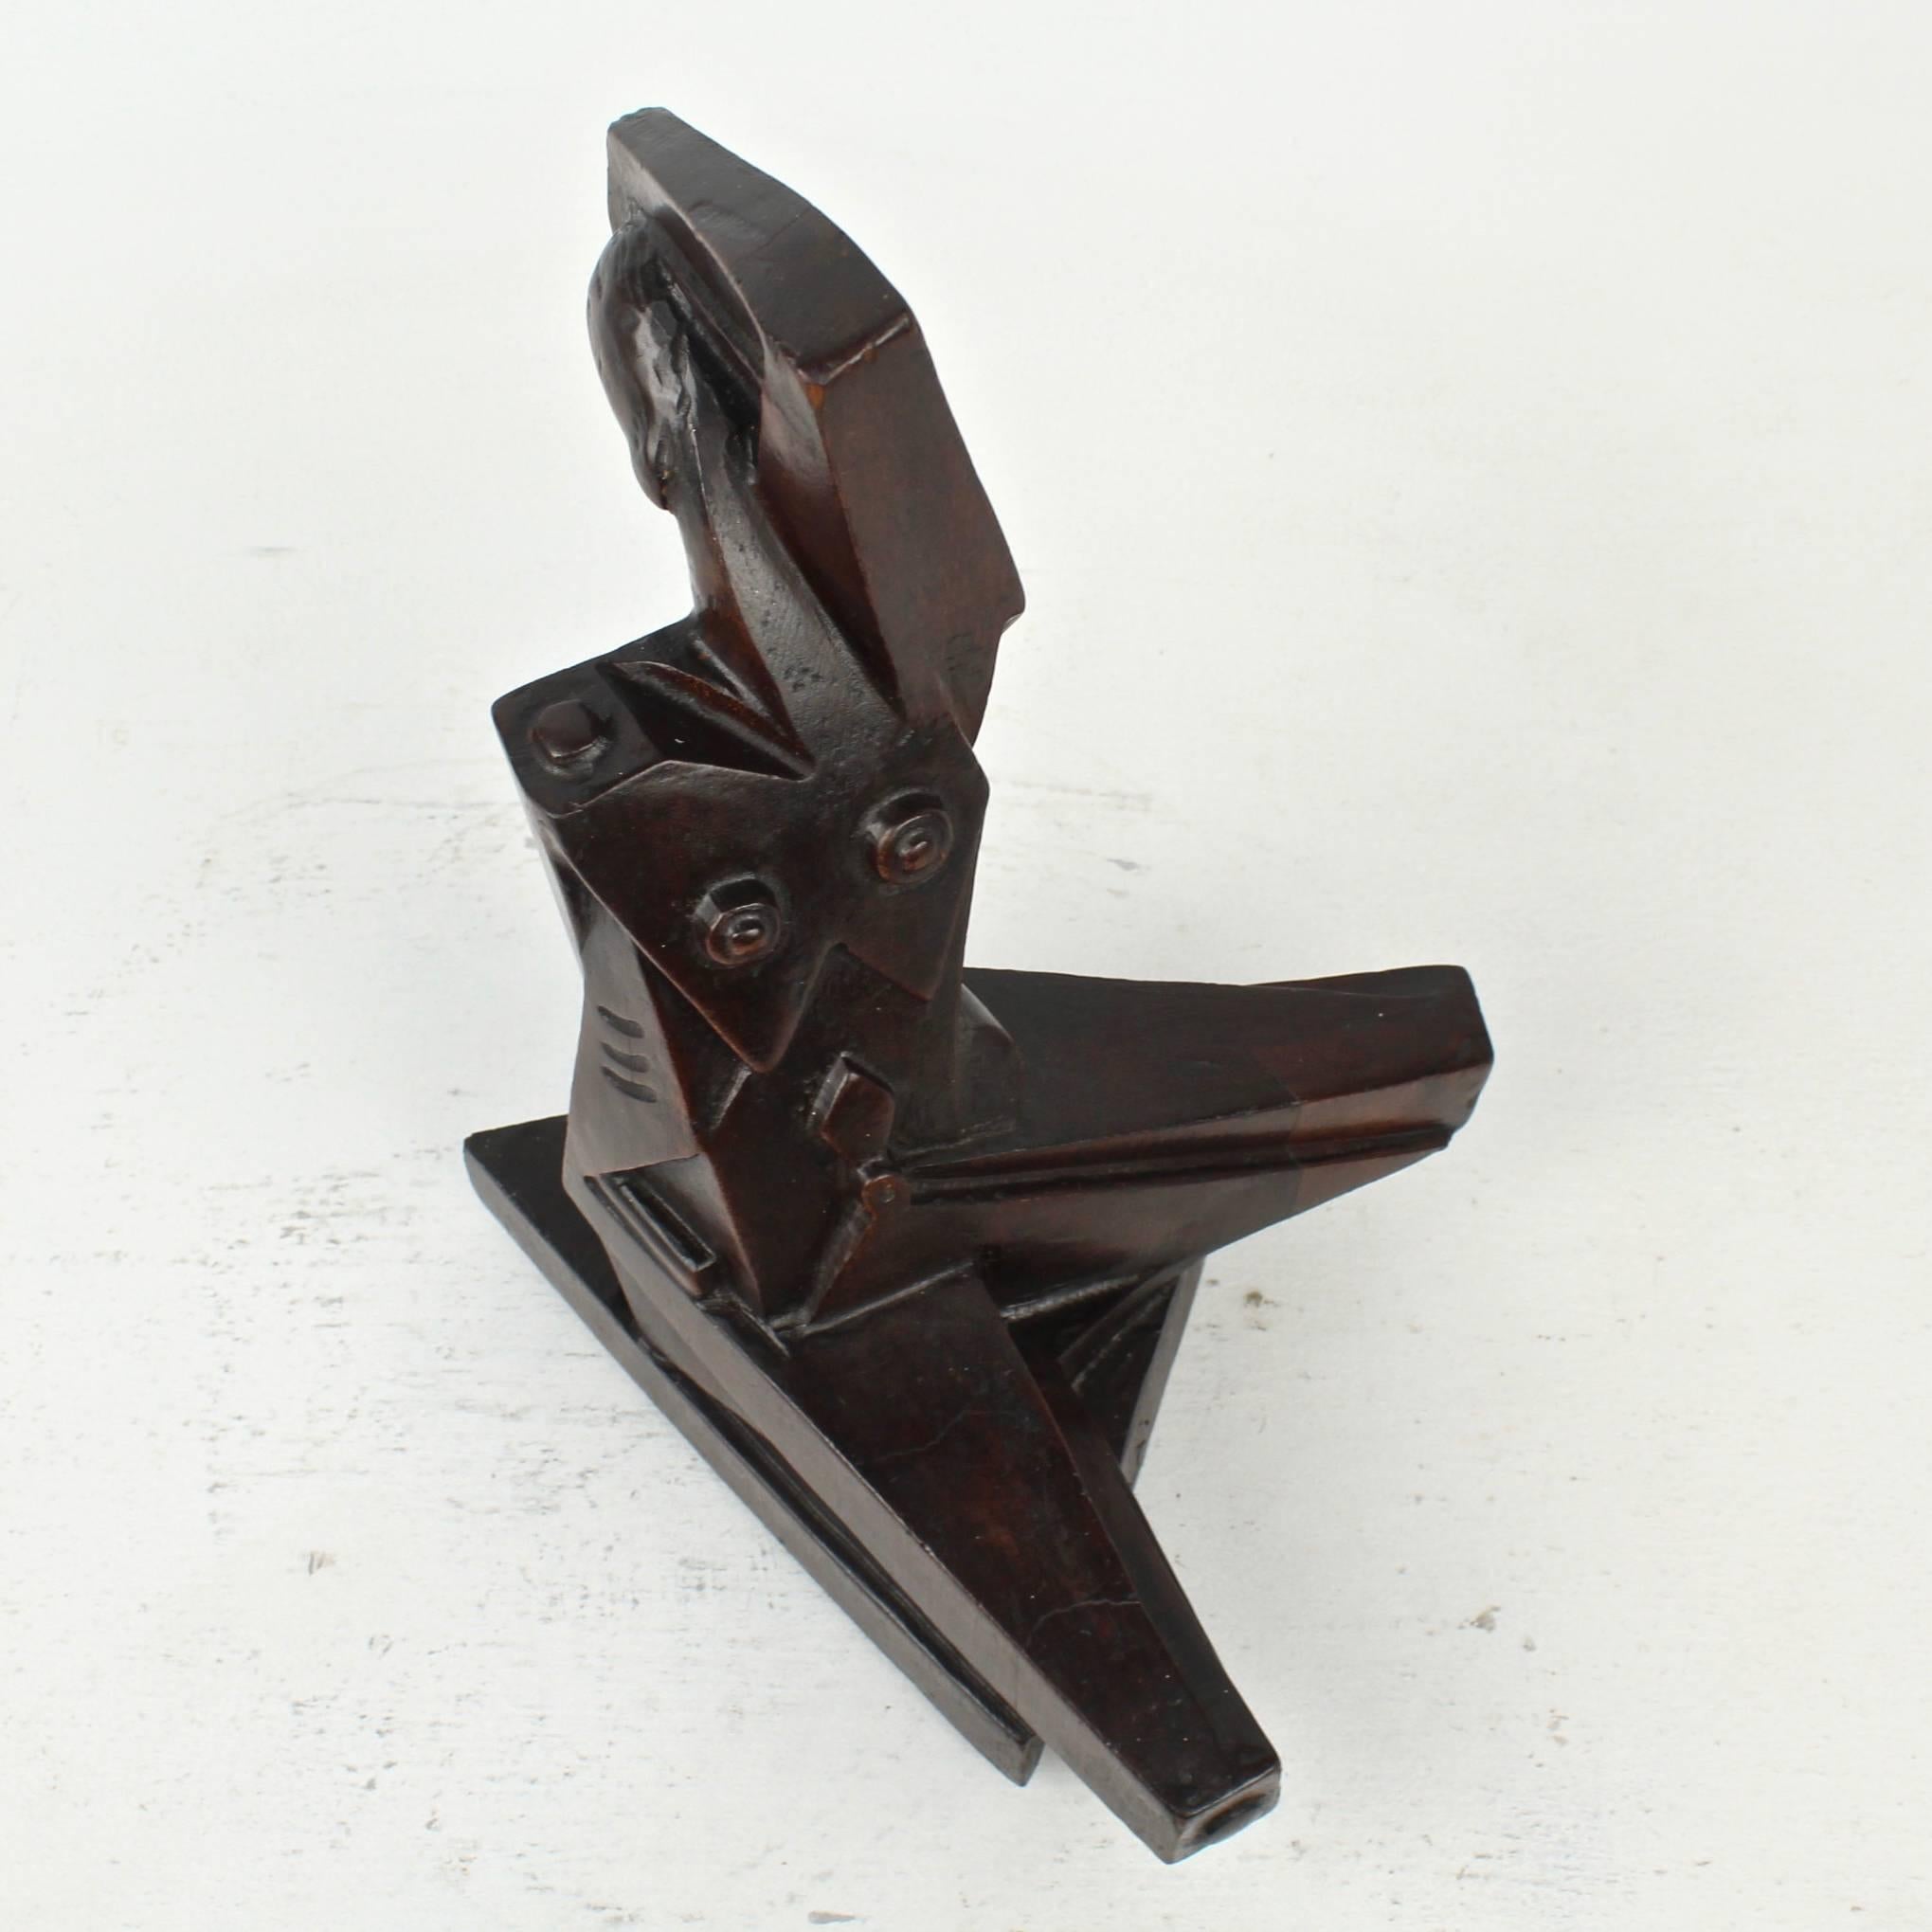 Carved Cubist Wood Sculpture of a Nude by Russian American Sculptor Boris Blai, 1930s For Sale